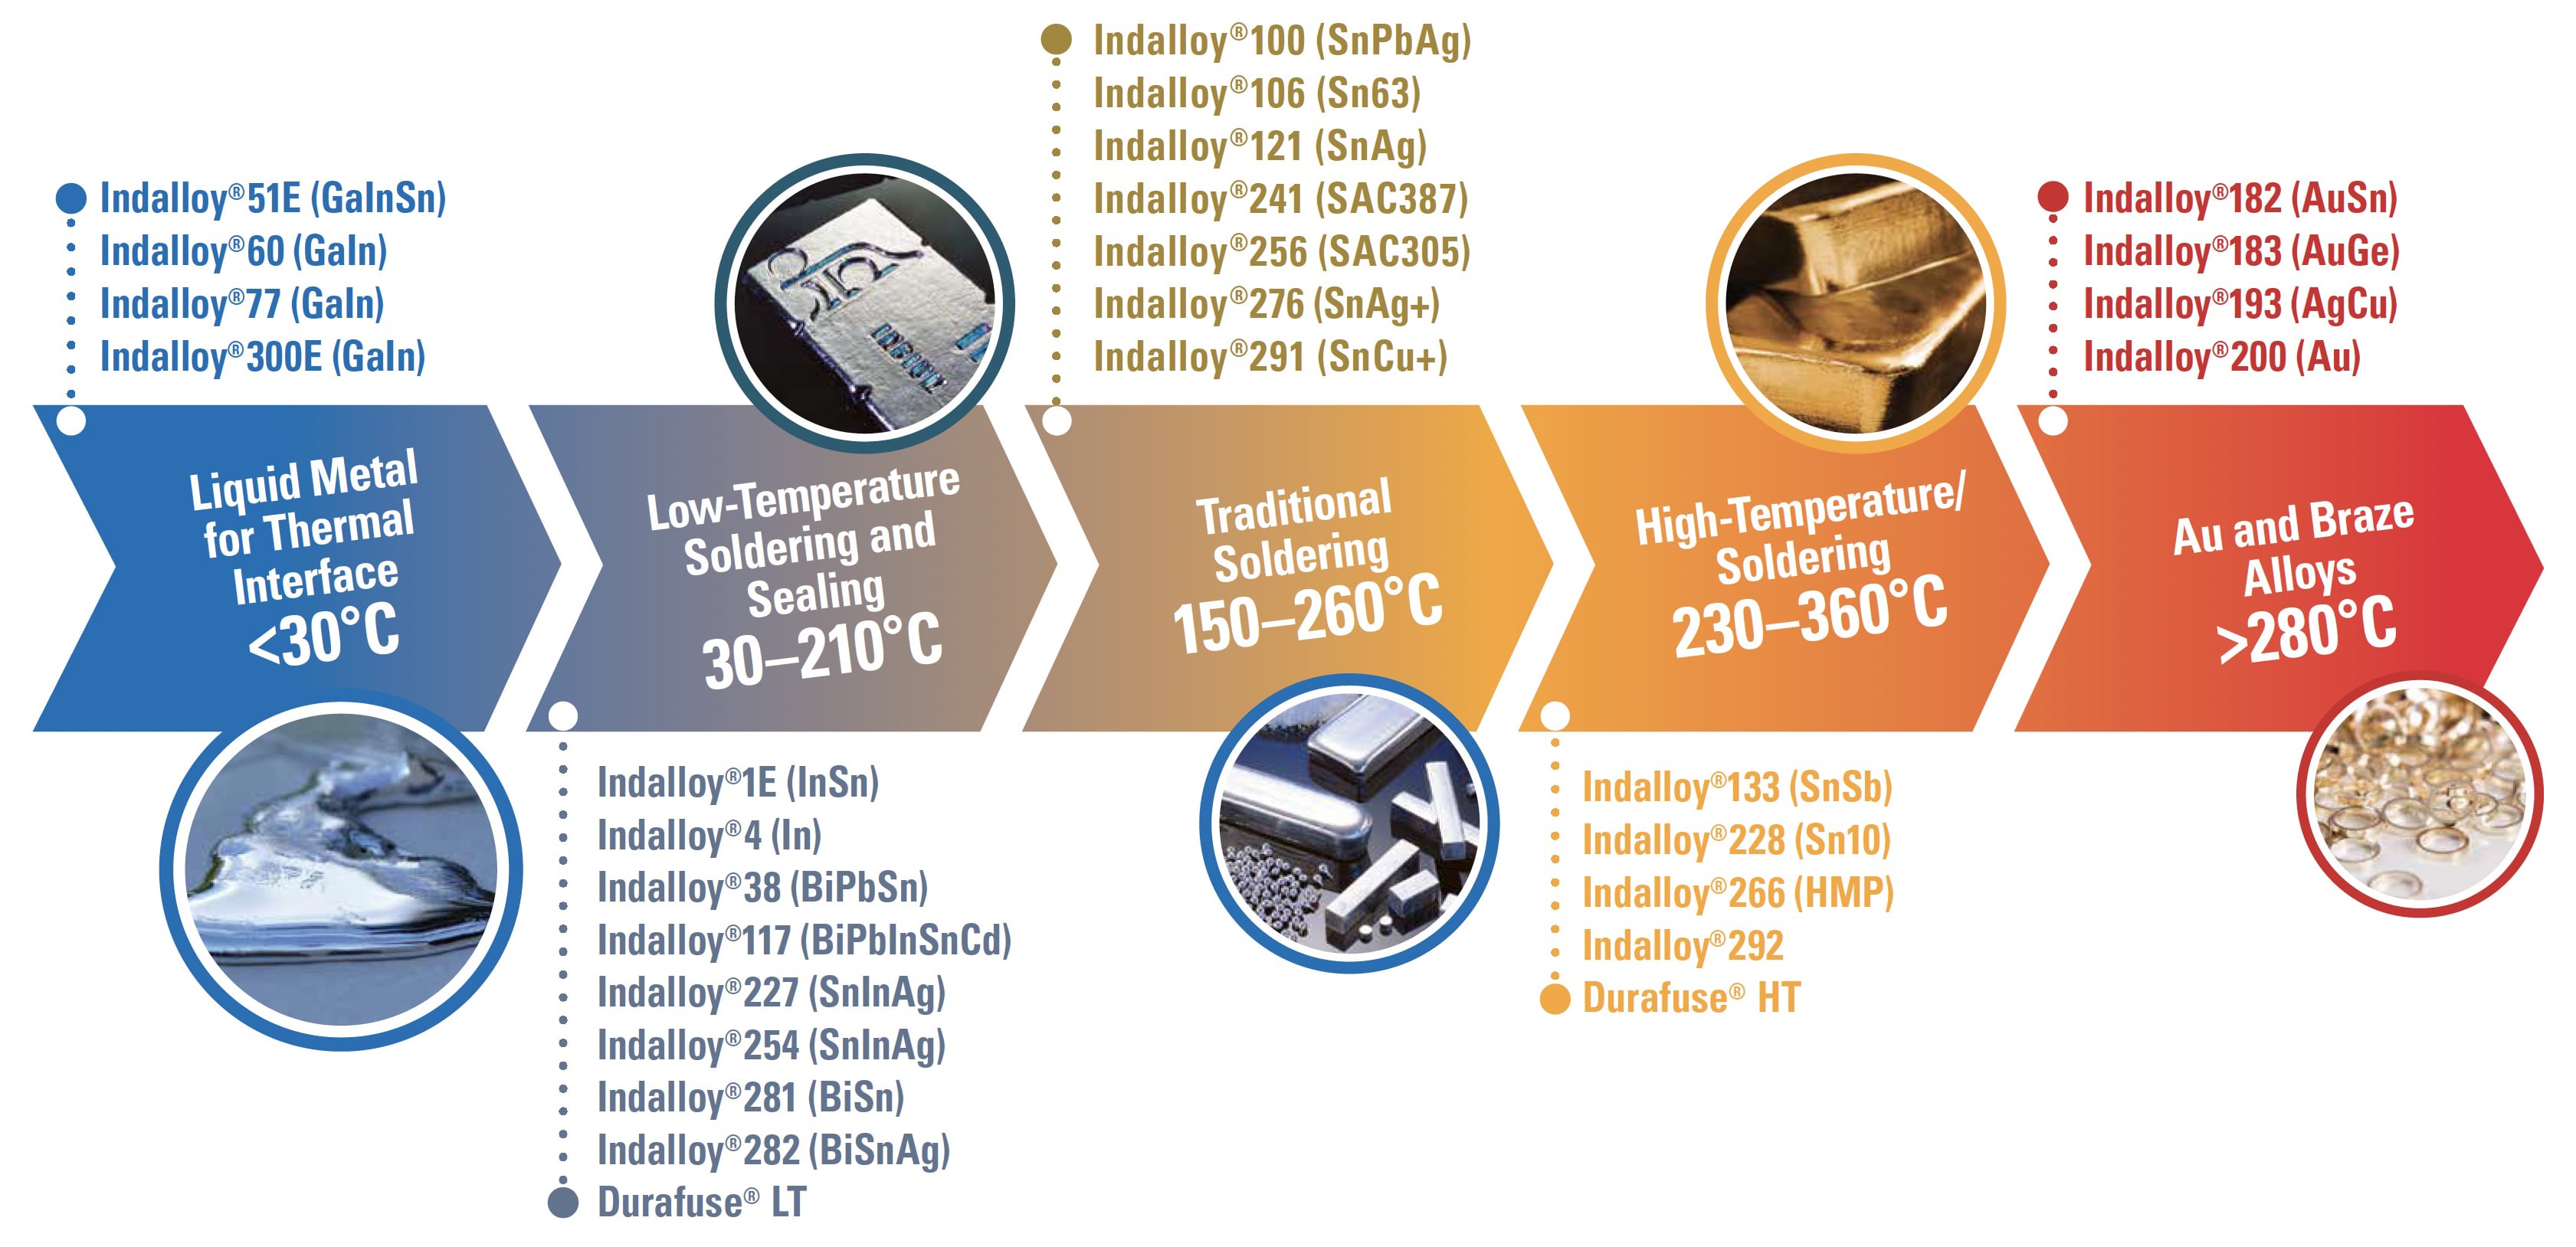 Indium Corporation offers high-reliability materials for electronics assembly and packaging with solder alloys which include liquid metal for thermal interface, alloys for low-temperature soldering and sealing, solder alloys for traditional soldering, high-temperature solder alloys, and gold and braze solder alloys.